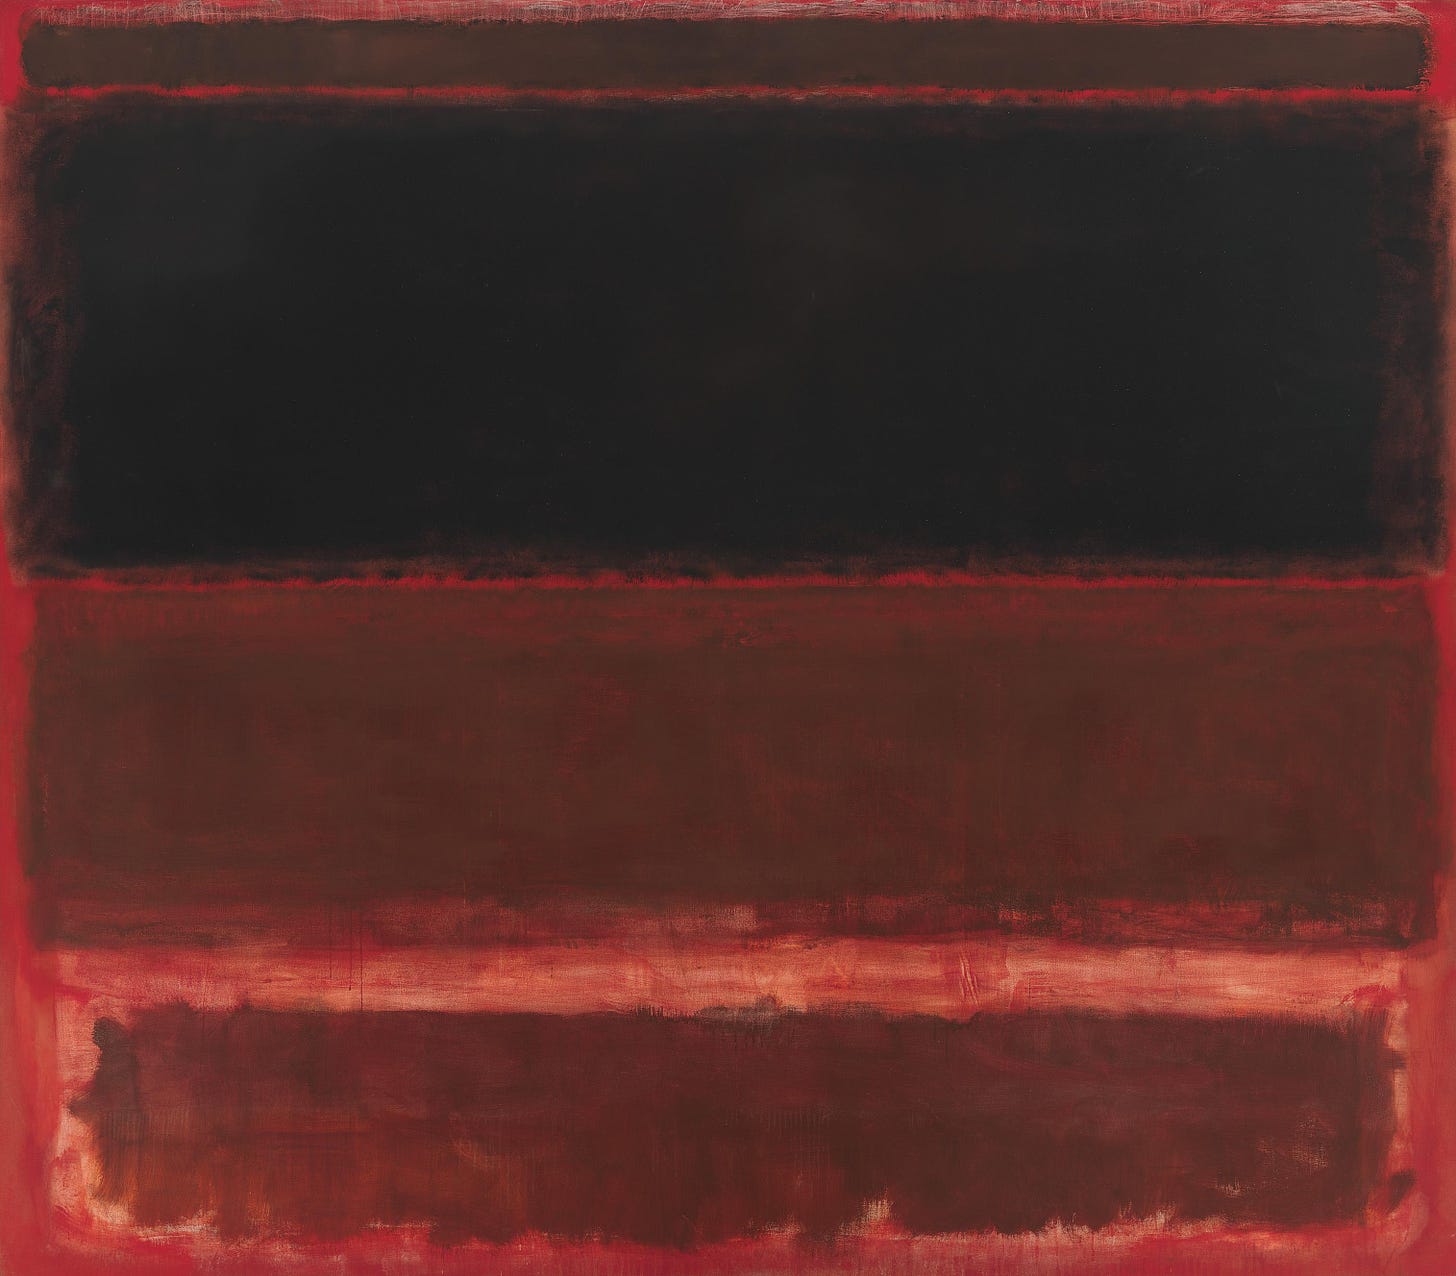 Whitney Museum on Twitter: "We're commemorating #MarkRothko's birthday  today with Four Darks in Red (1958) from the Whitney's collection. What's  your favorite Rothko color combination? https://t.co/3P5P3cTA9e" / Twitter